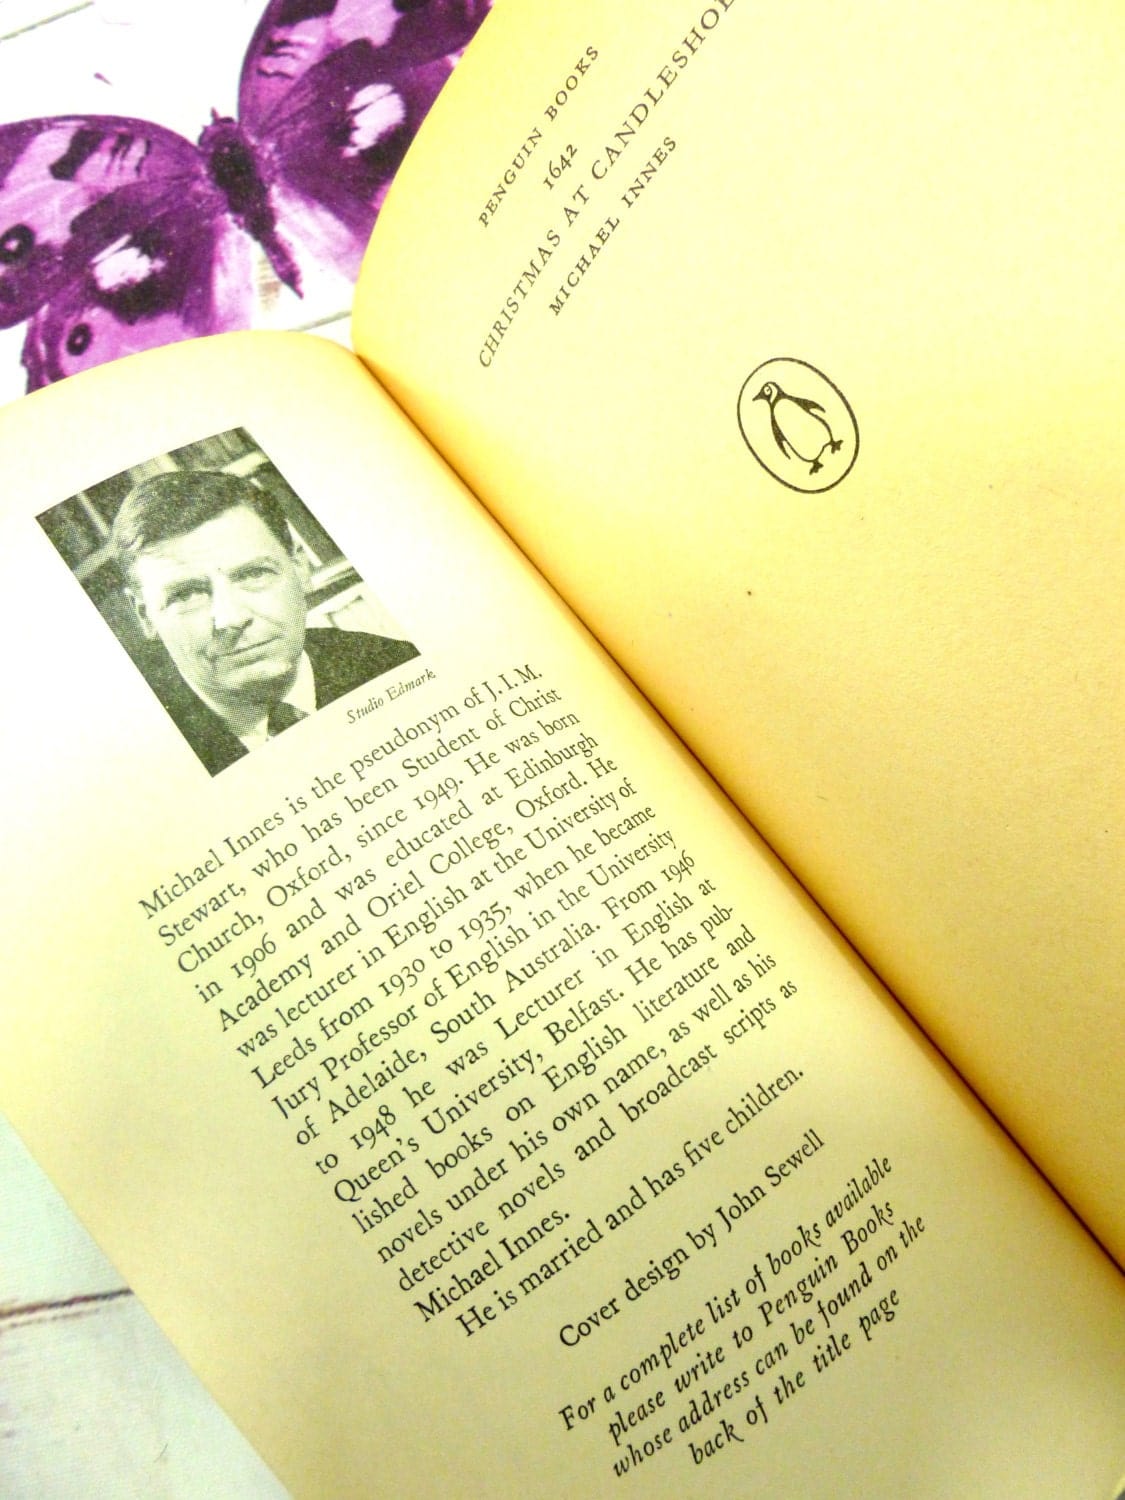 Inner cover of Vintage Penguin Paperback Christmas at Candleshoe by Michael Innes First Edition showing a grayscale photograph of Michael Innes.